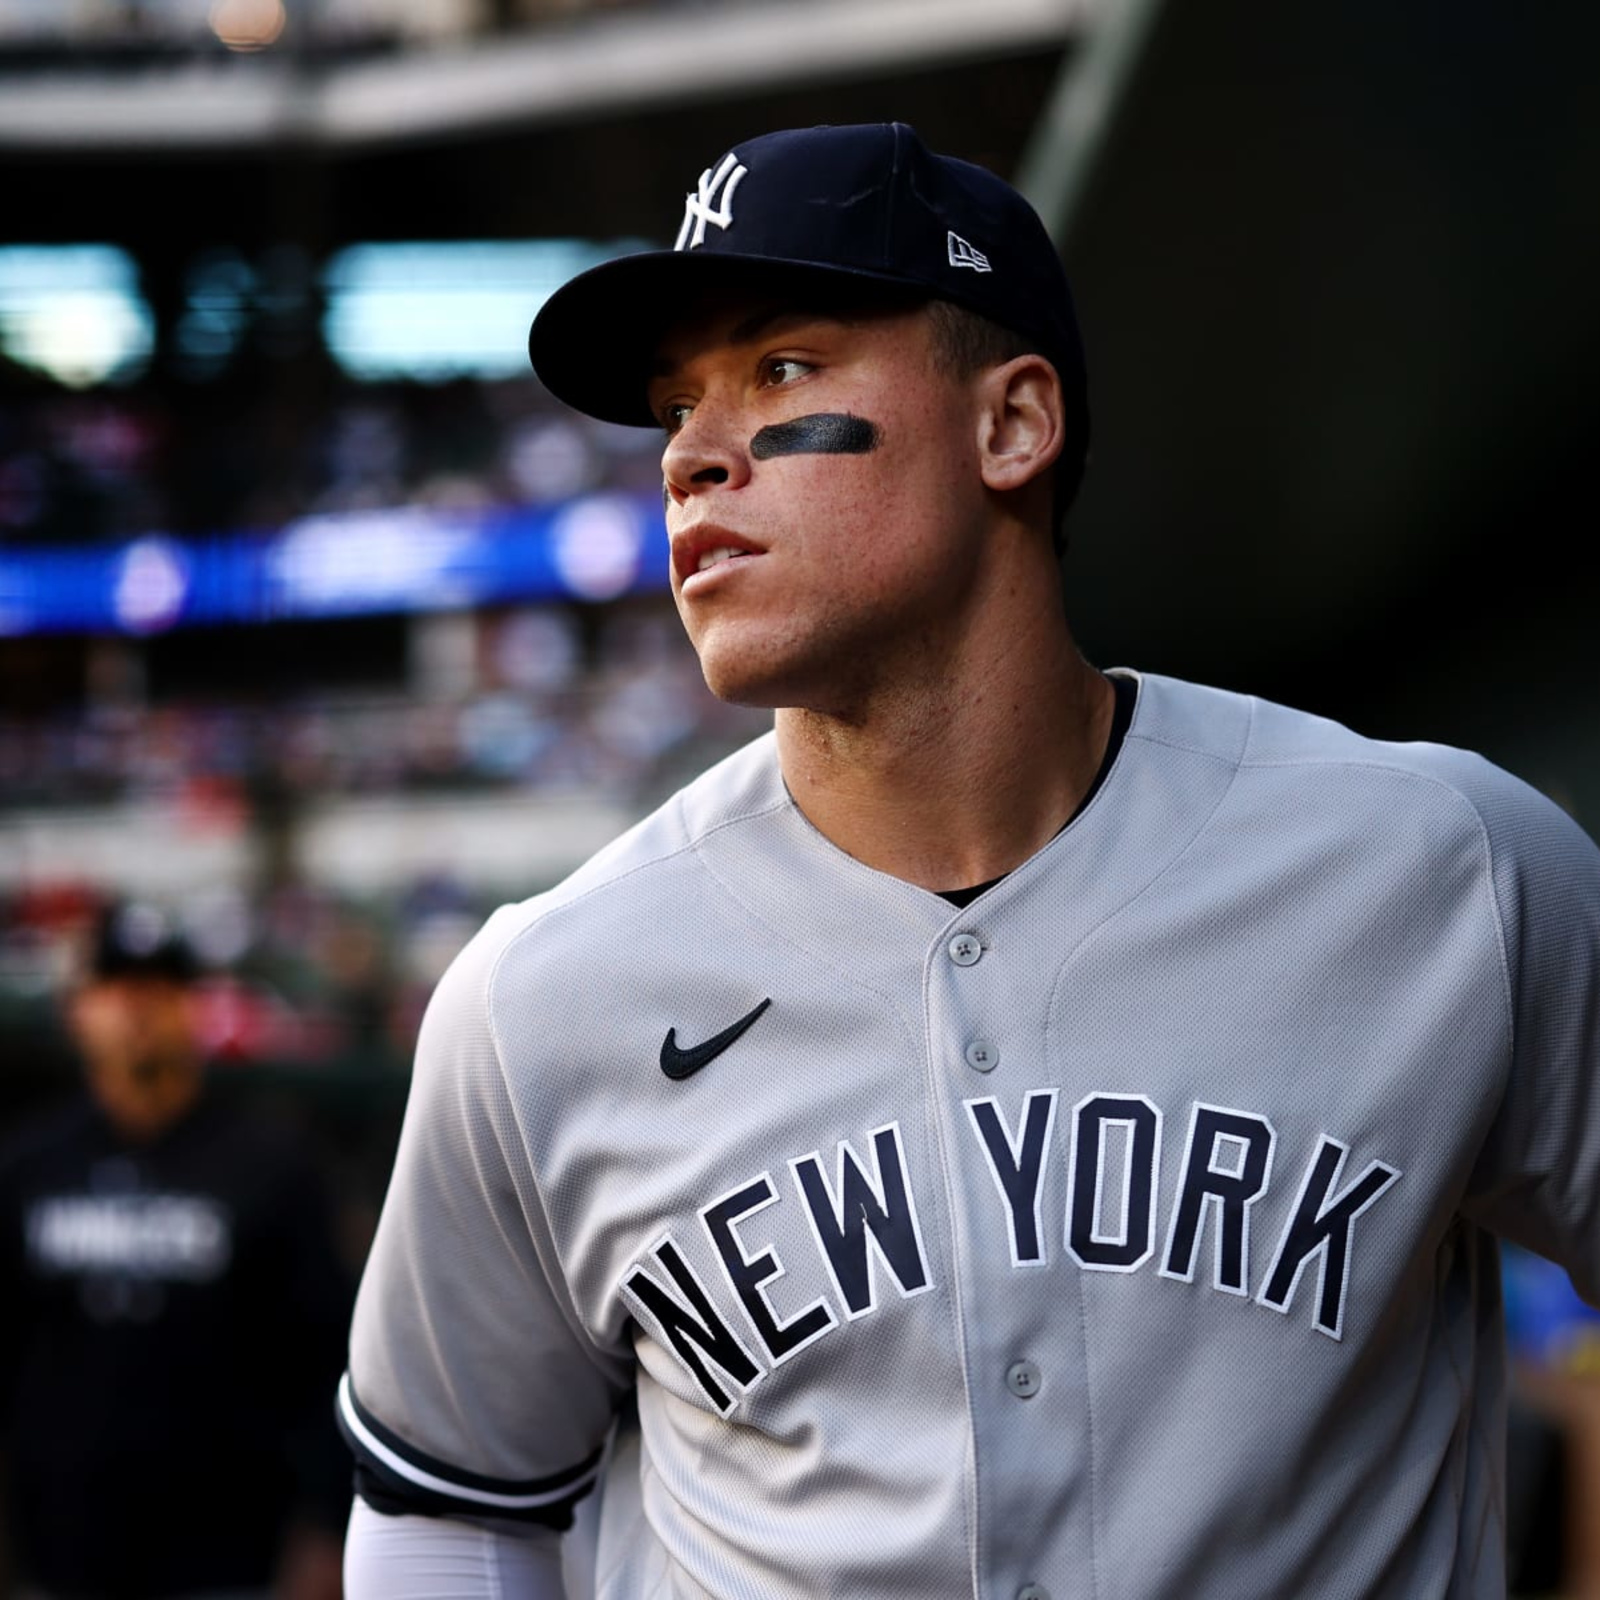 Aaron Judge's injury history brings a troubling question